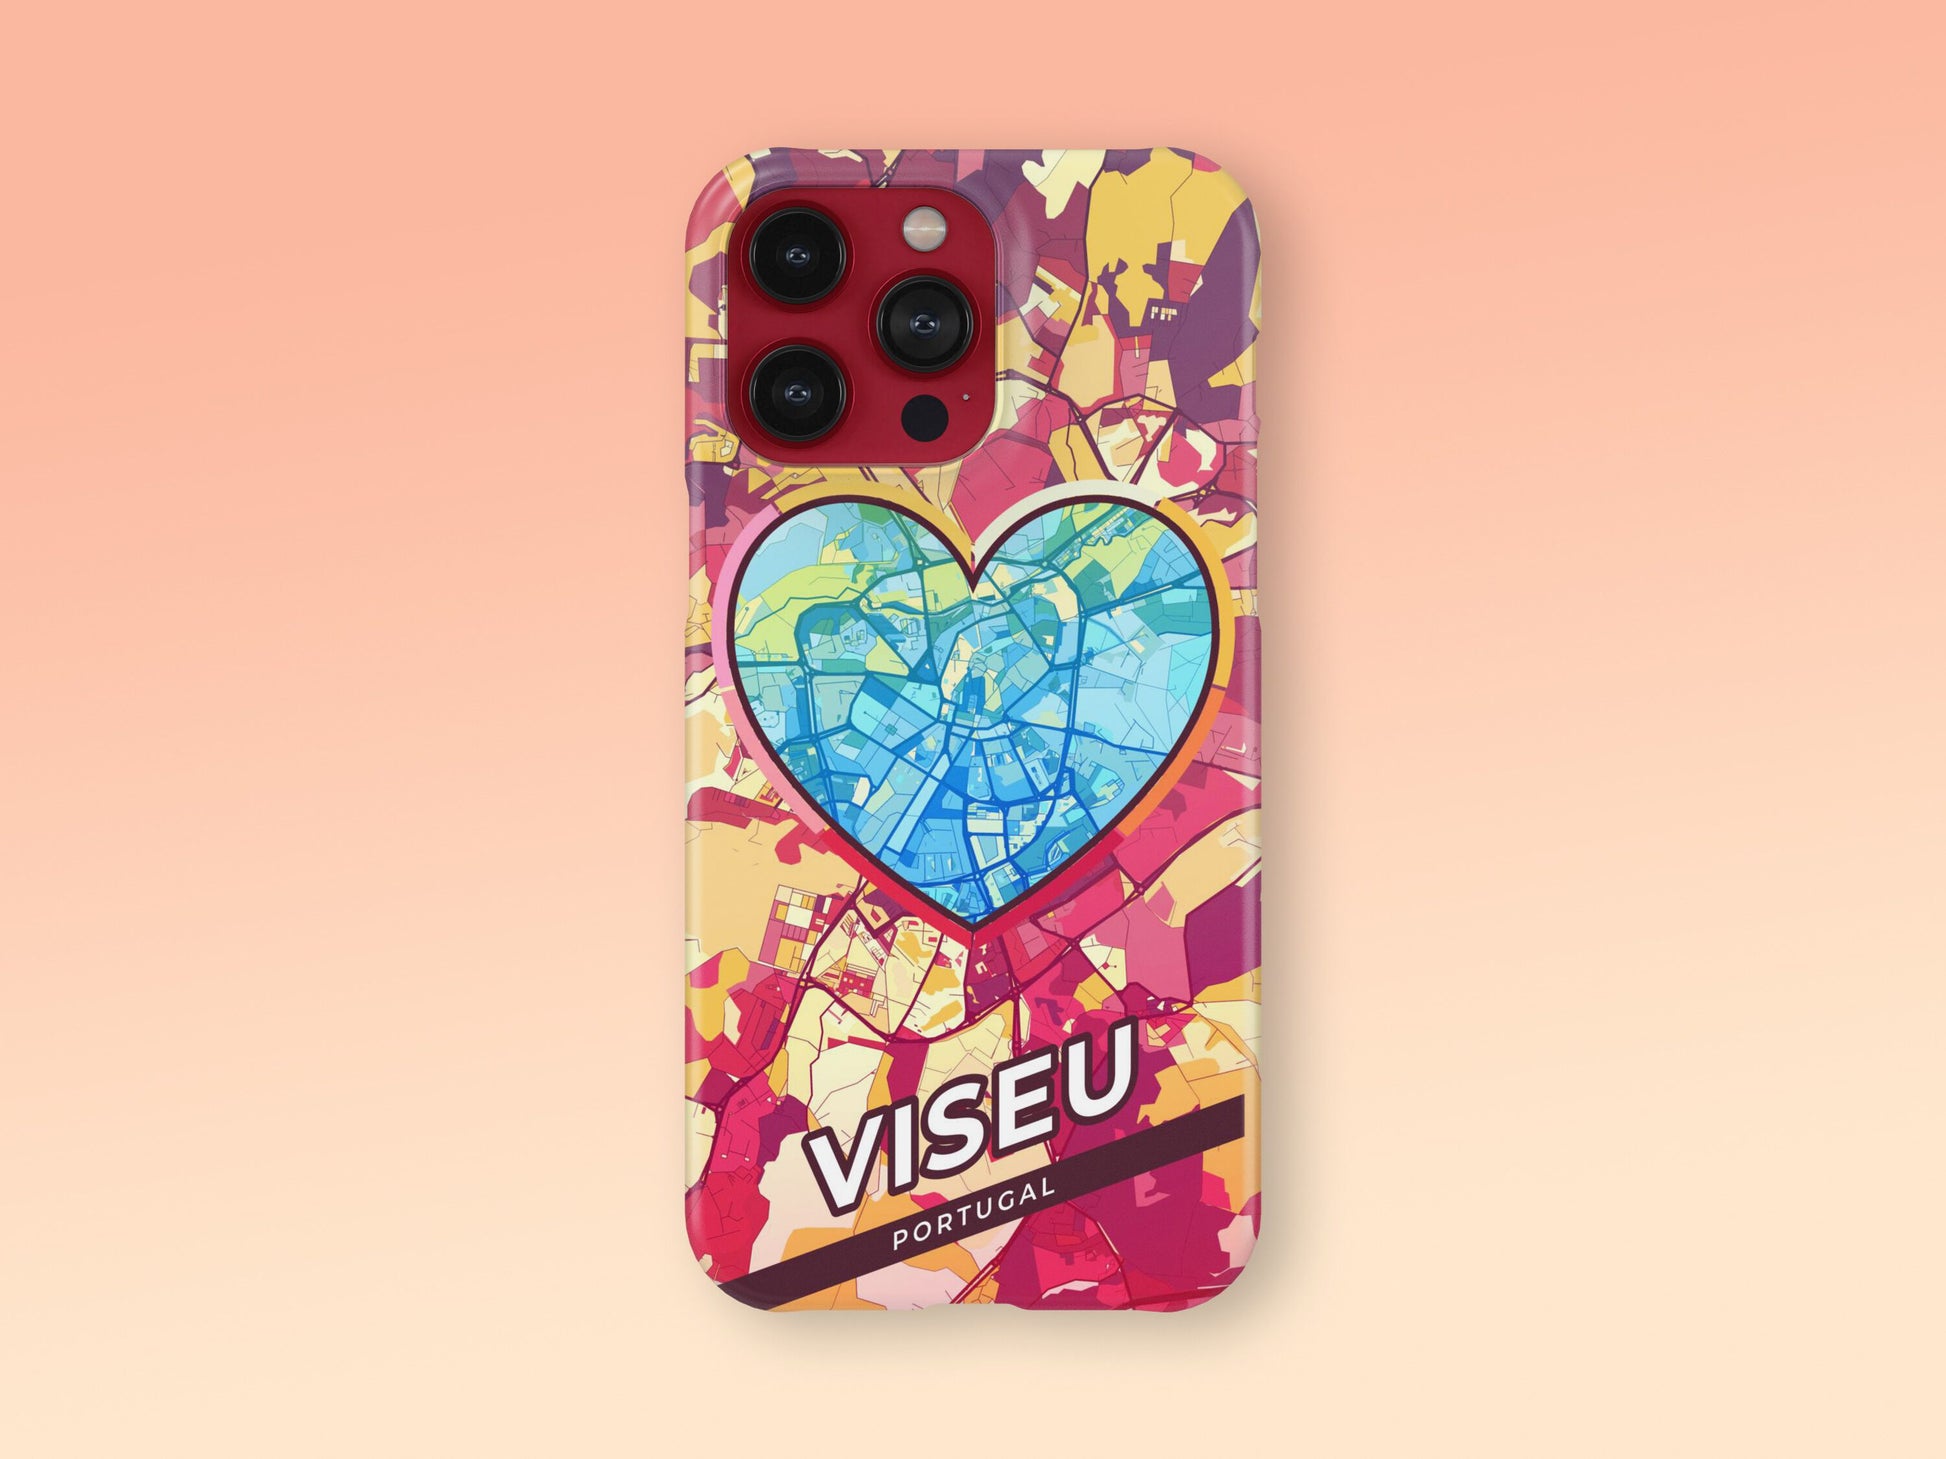 Viseu Portugal slim phone case with colorful icon 2